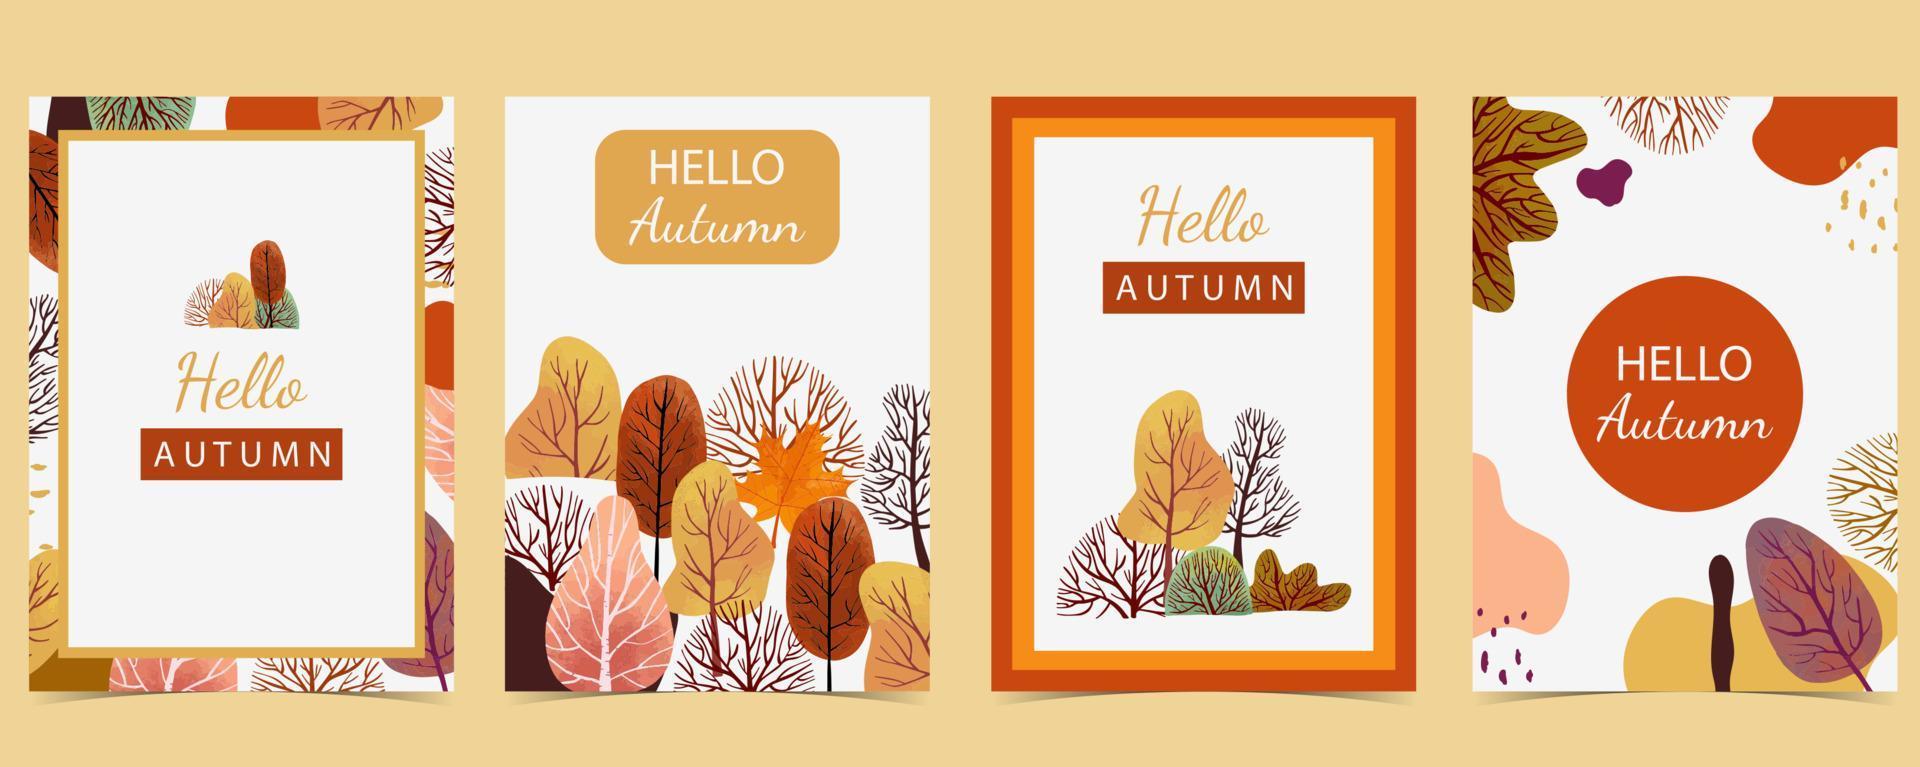 orange autumn background with tree,forest vector